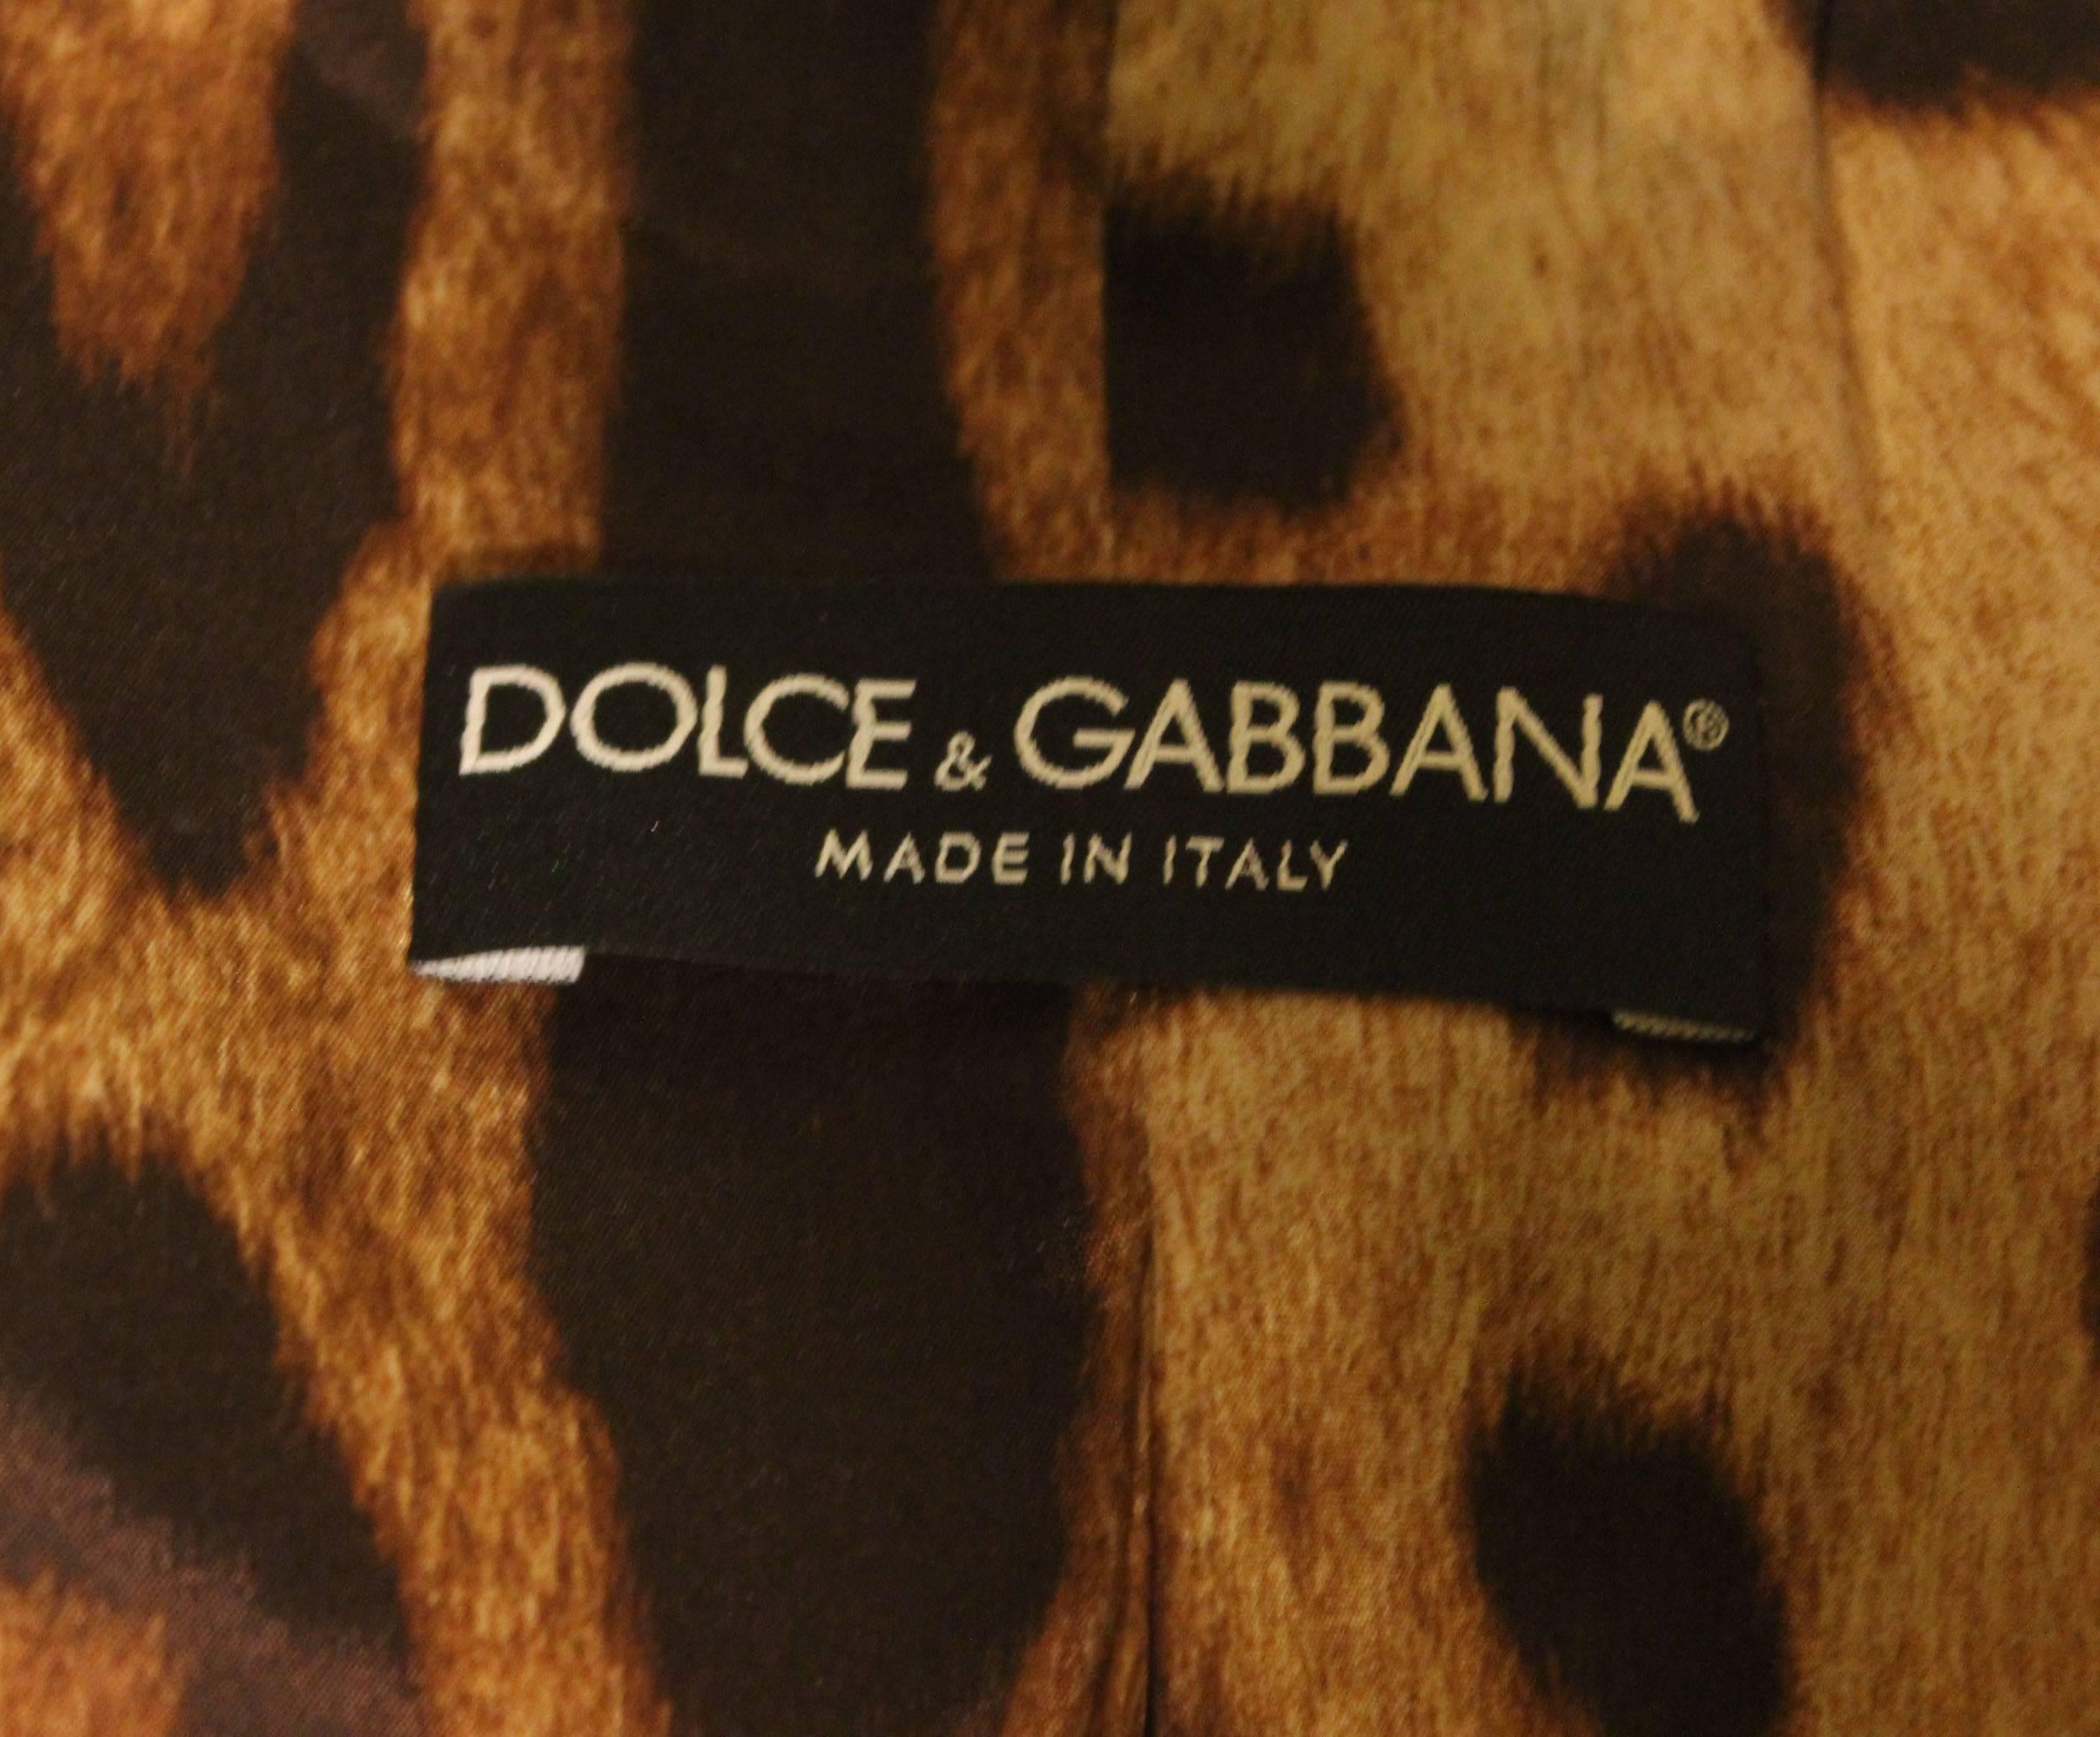 Dolce & Gabbana Metallic Gold Pant Suit For Sale 5